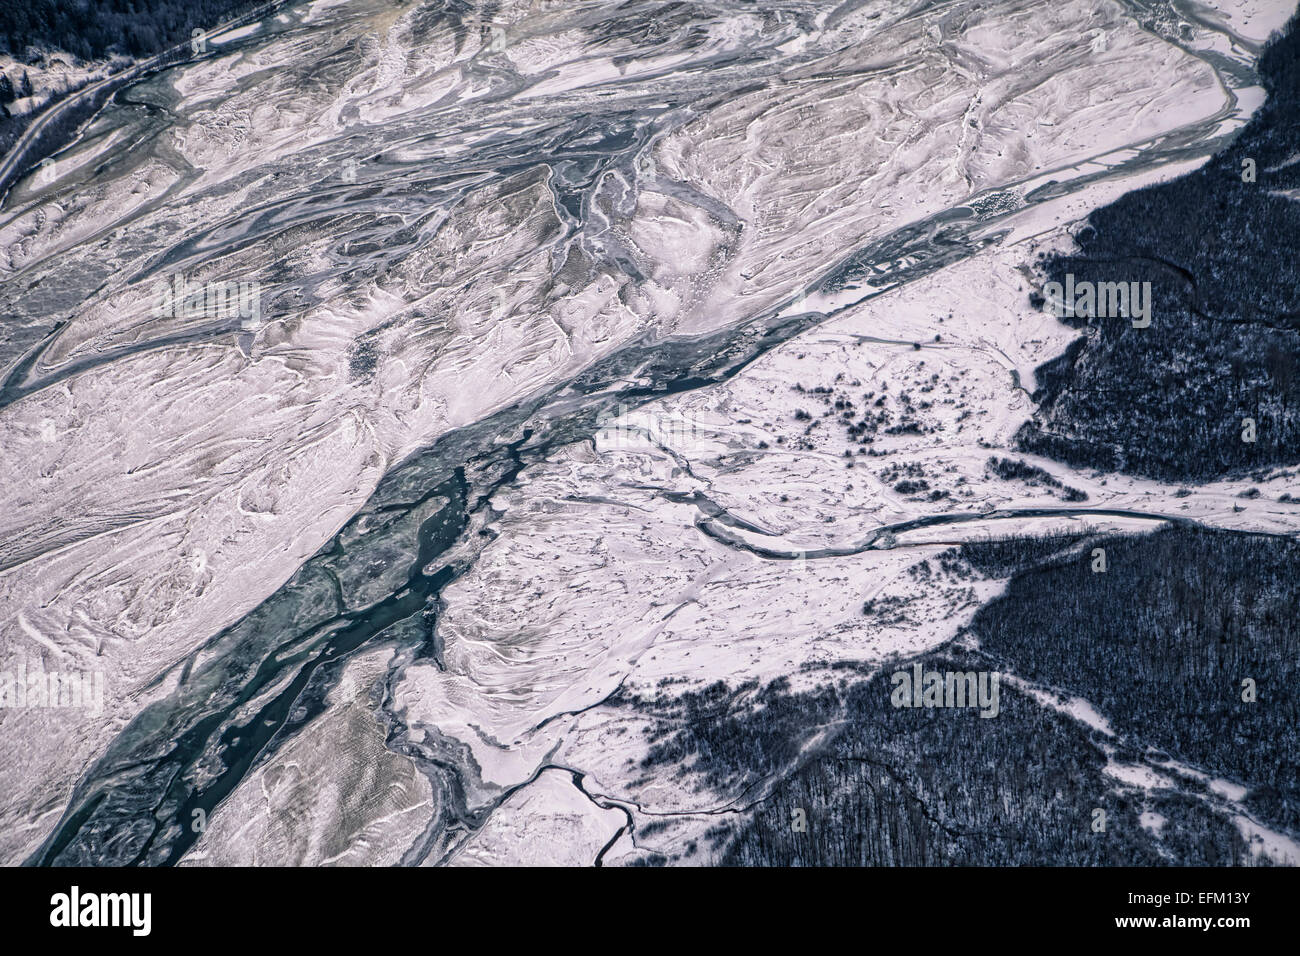 Ice and snow in winter on the Chilkat River near Haines Alaska as seen from the air. Stock Photo